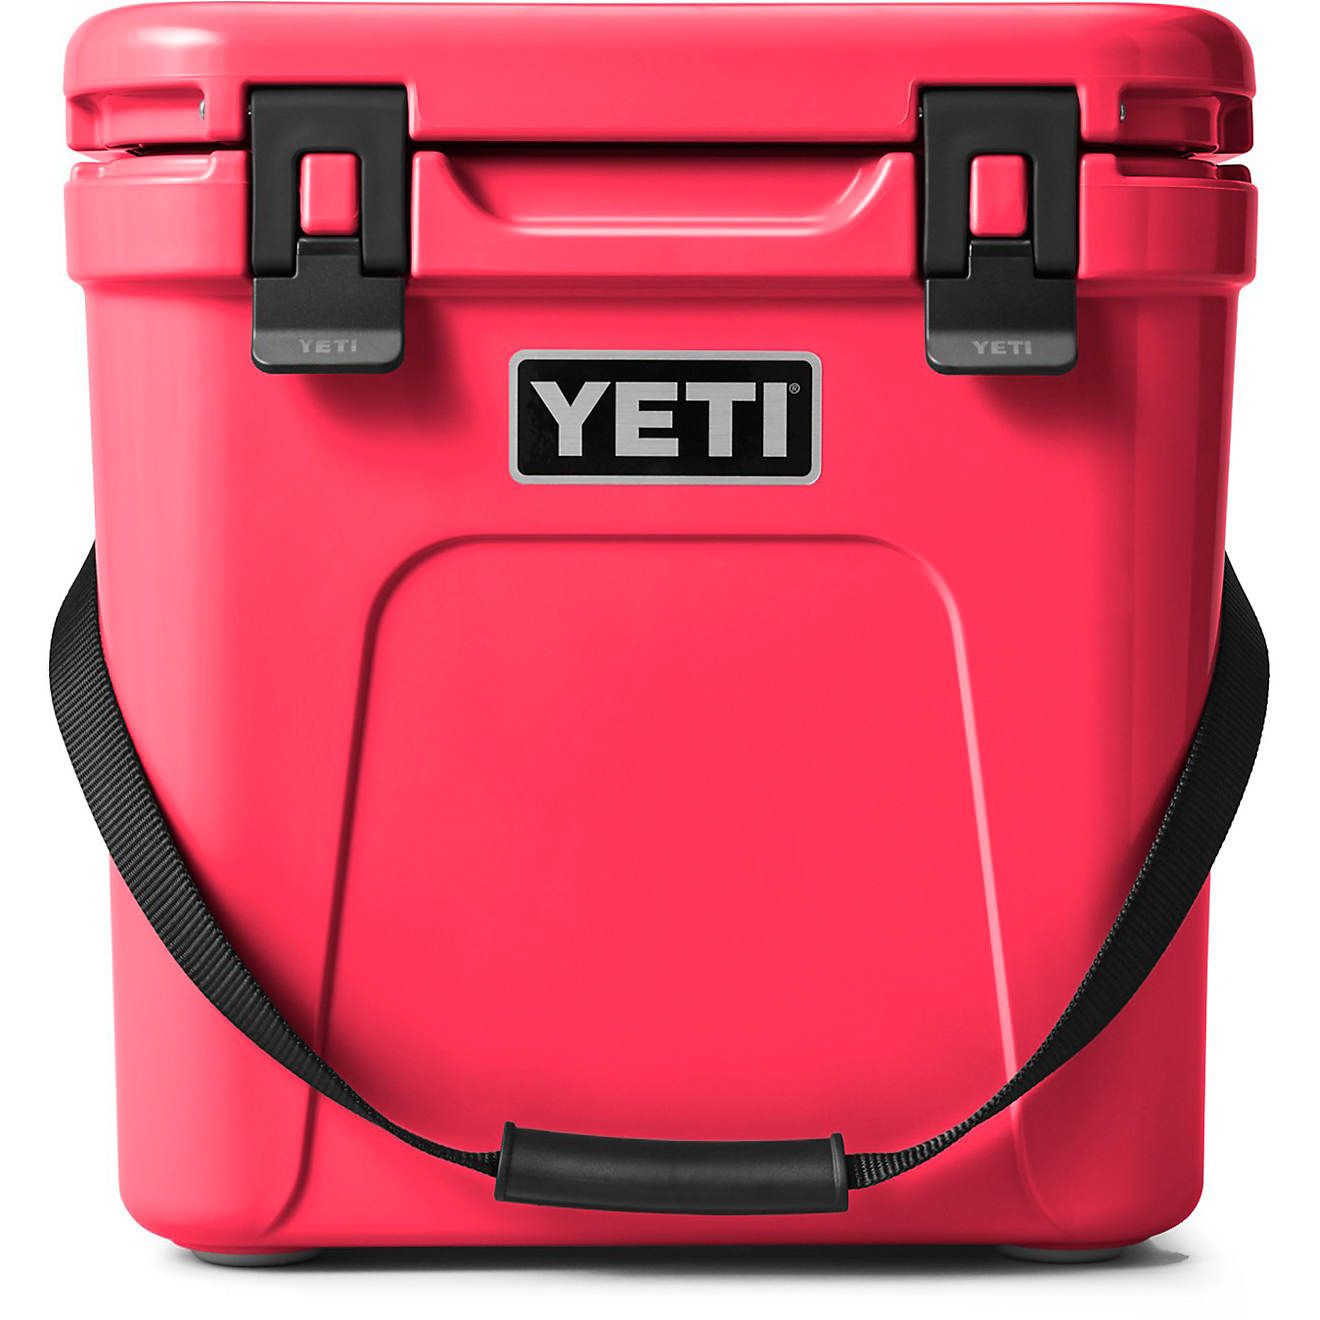 YETI Roadie 24 18-Can Hard Cooler | Academy Sports + Outdoors